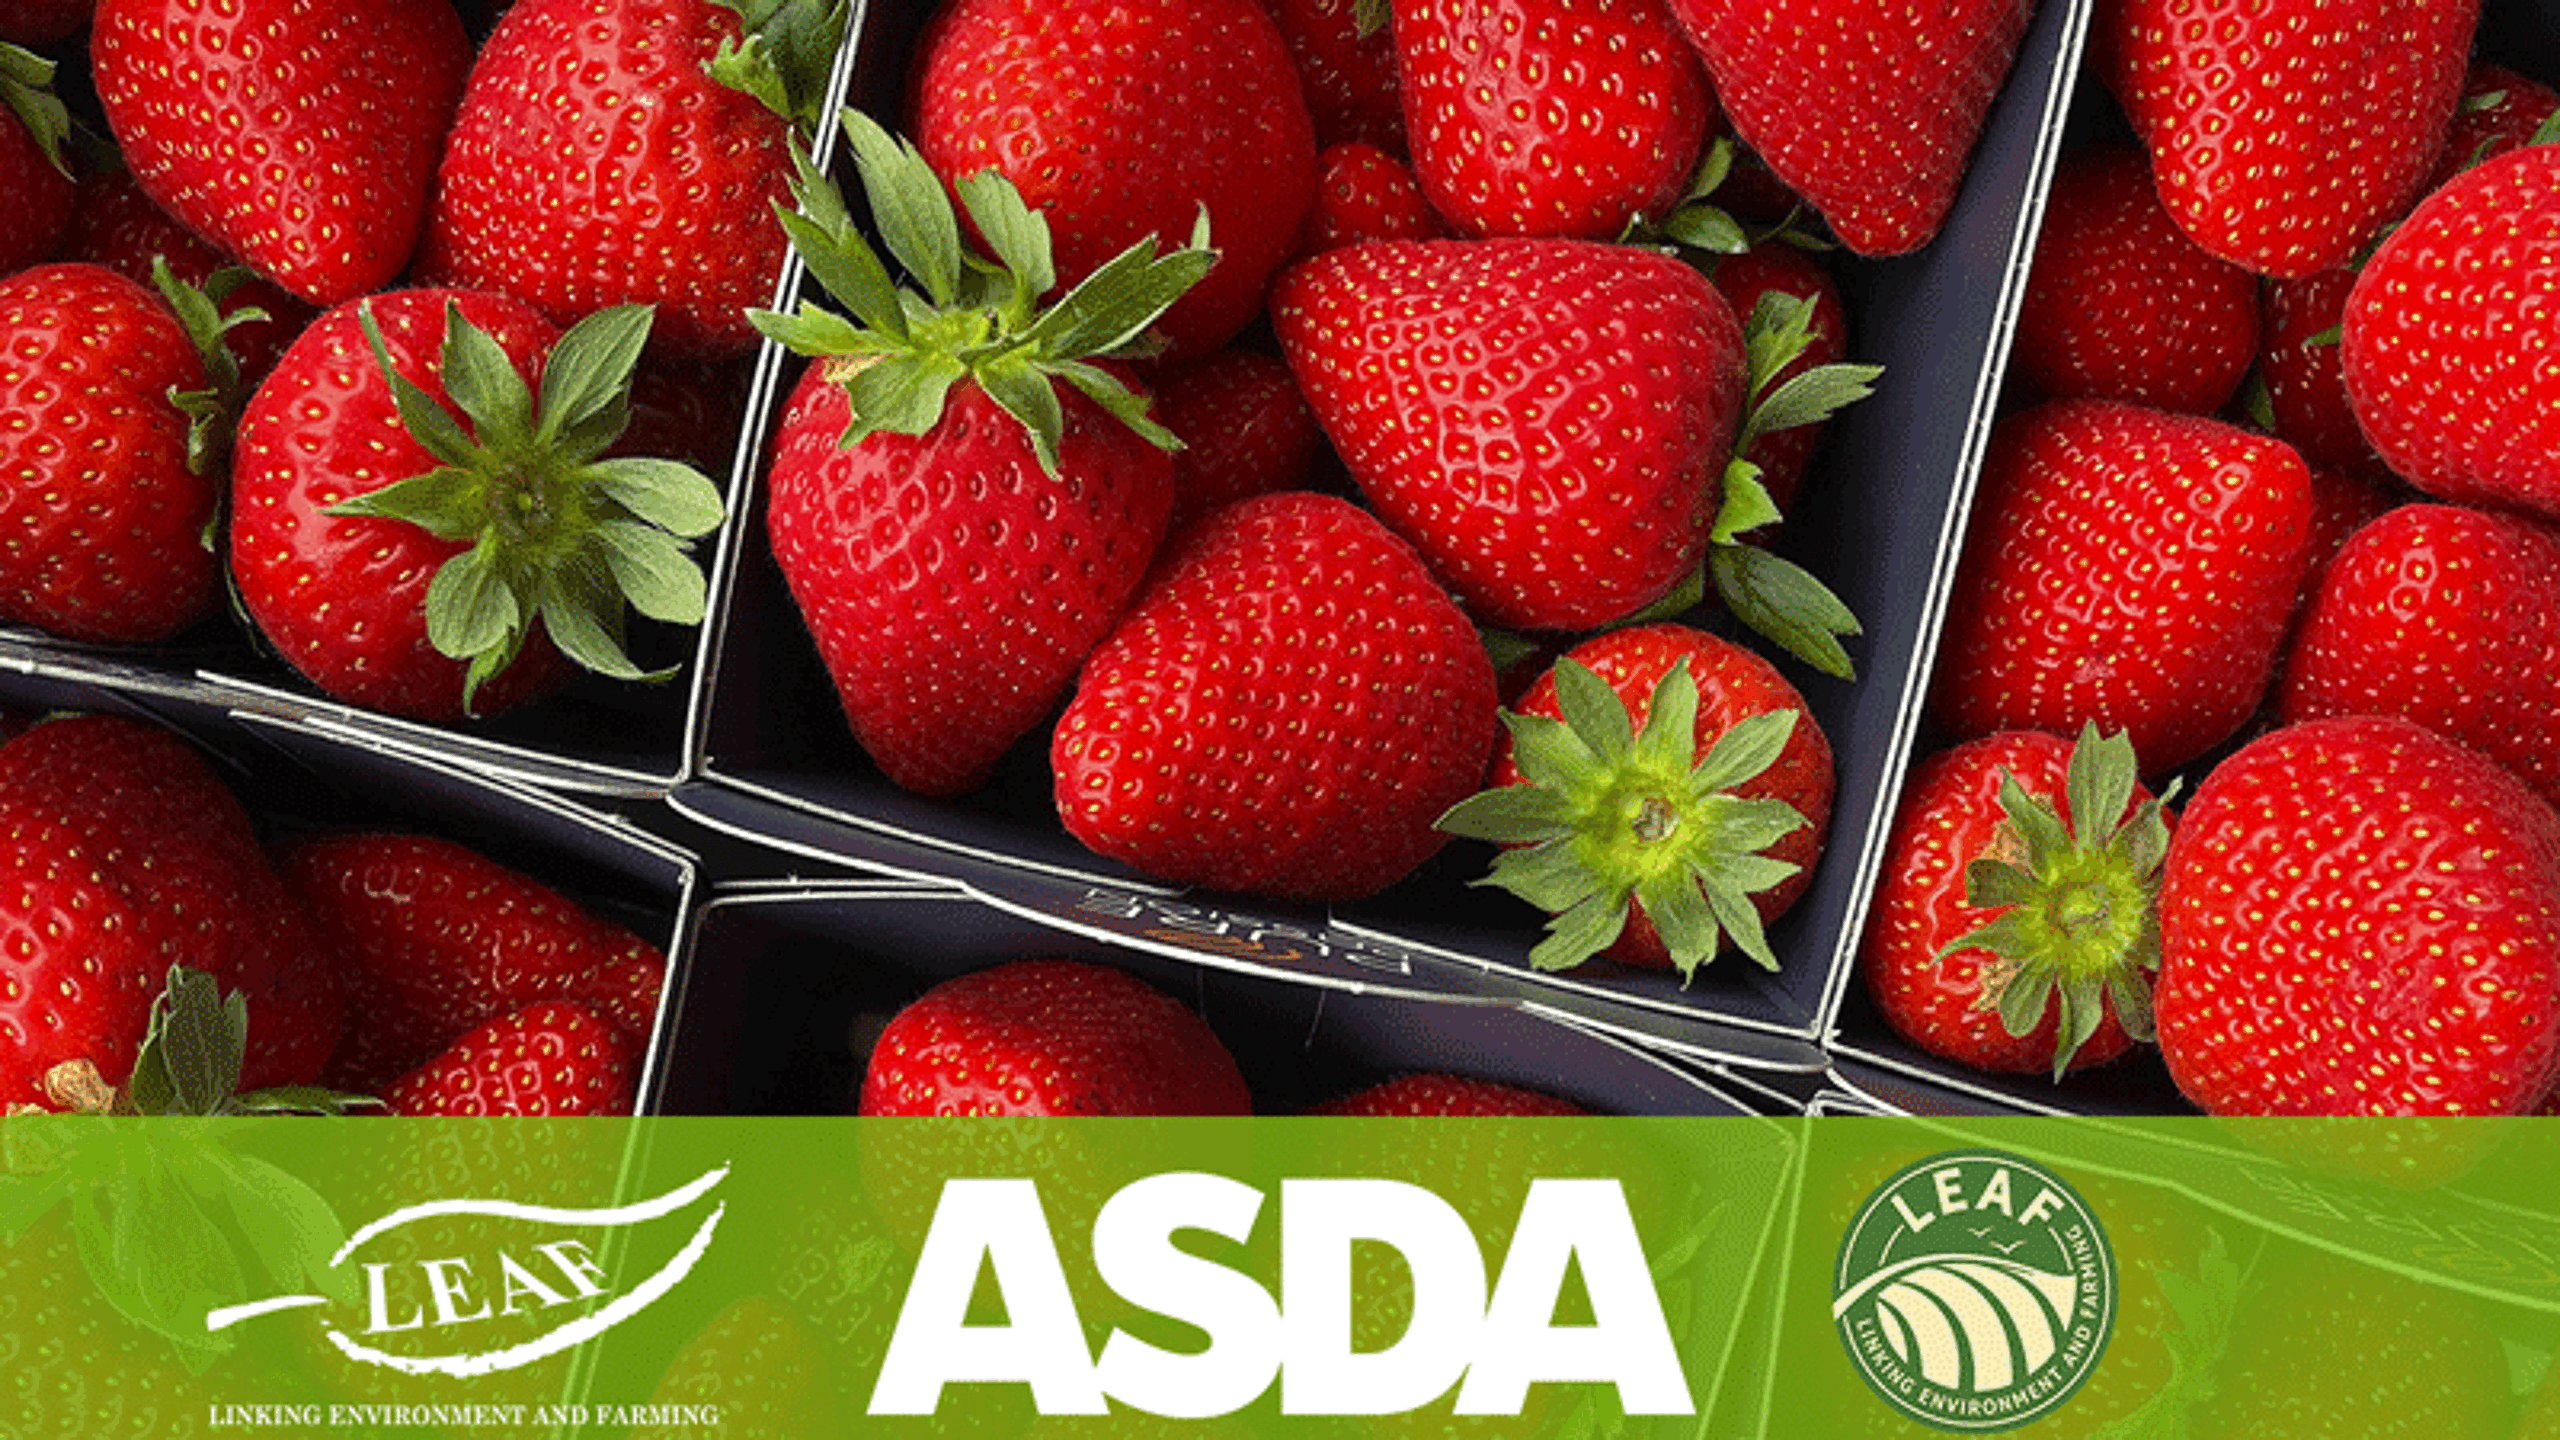 Asda pledges sustainable certification for all fresh produce by 2025